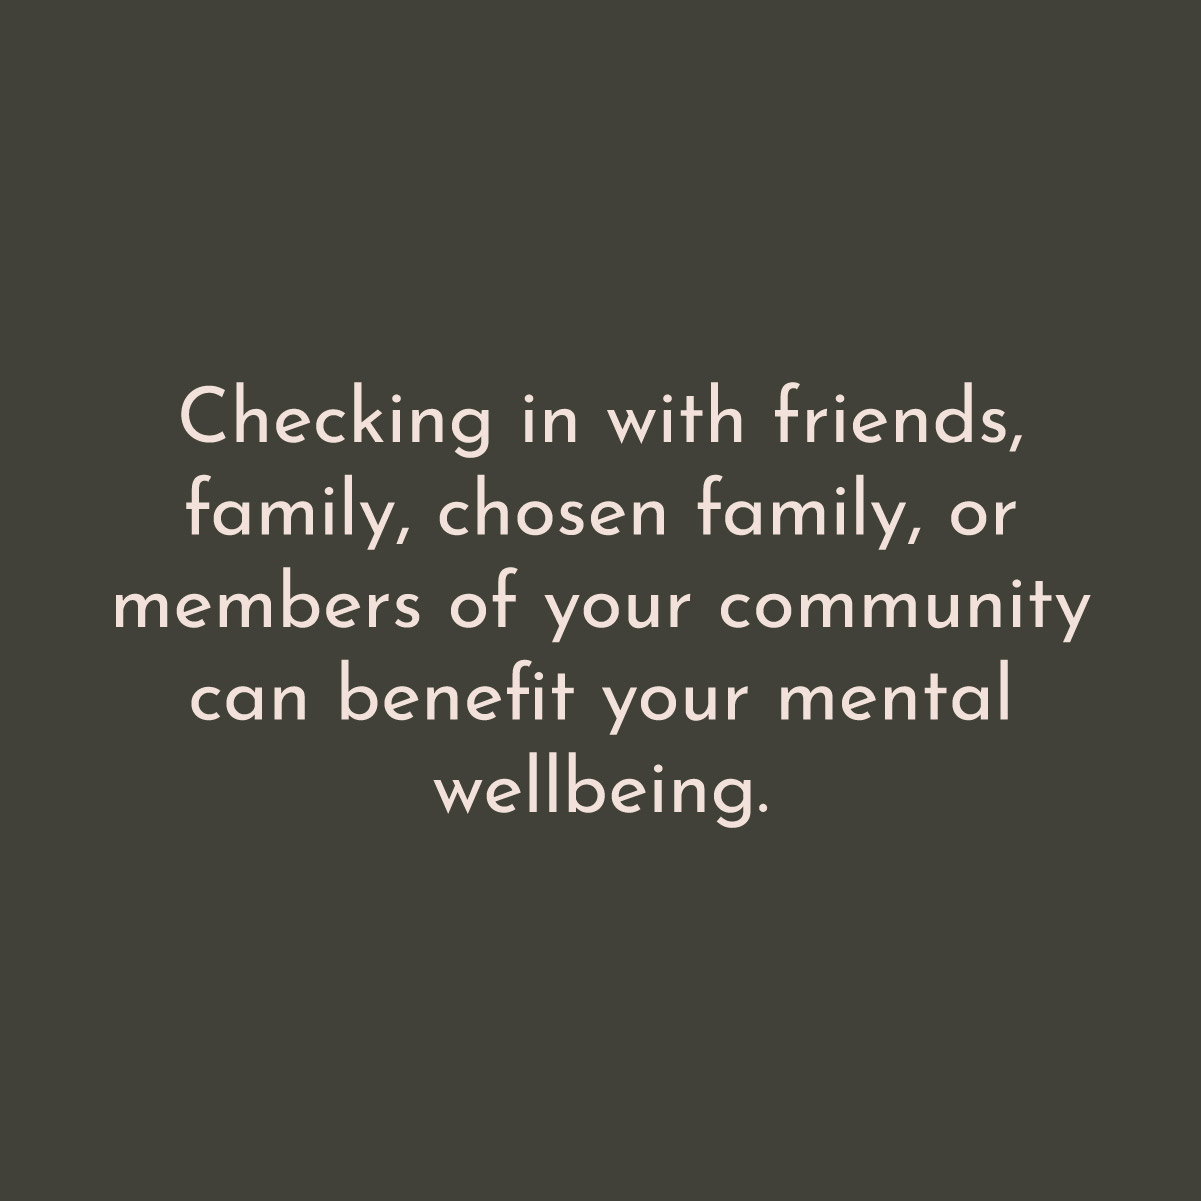 Checking in with friends, family, chosen family, or members of your community can benefit your mental well being.